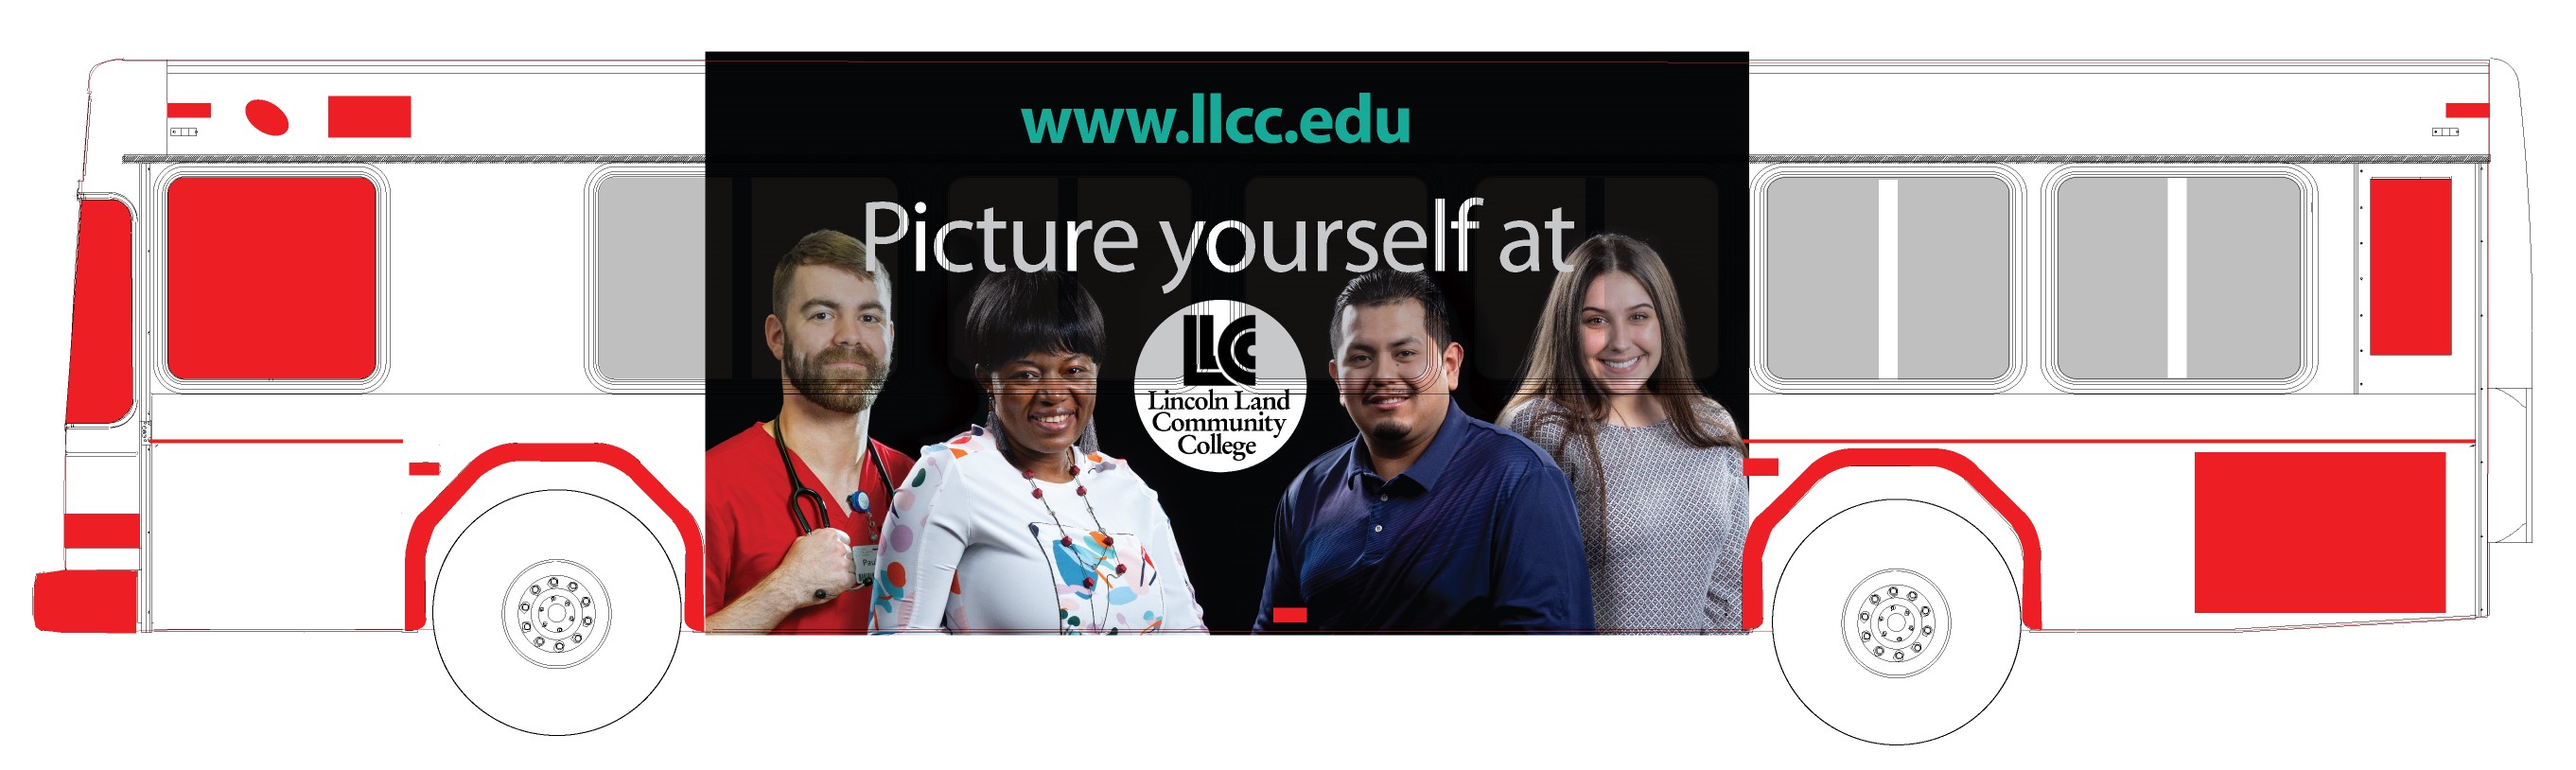 Ad on bus. www.llcc.edu Picture yourself at LLCC Lincoln Land Community College 